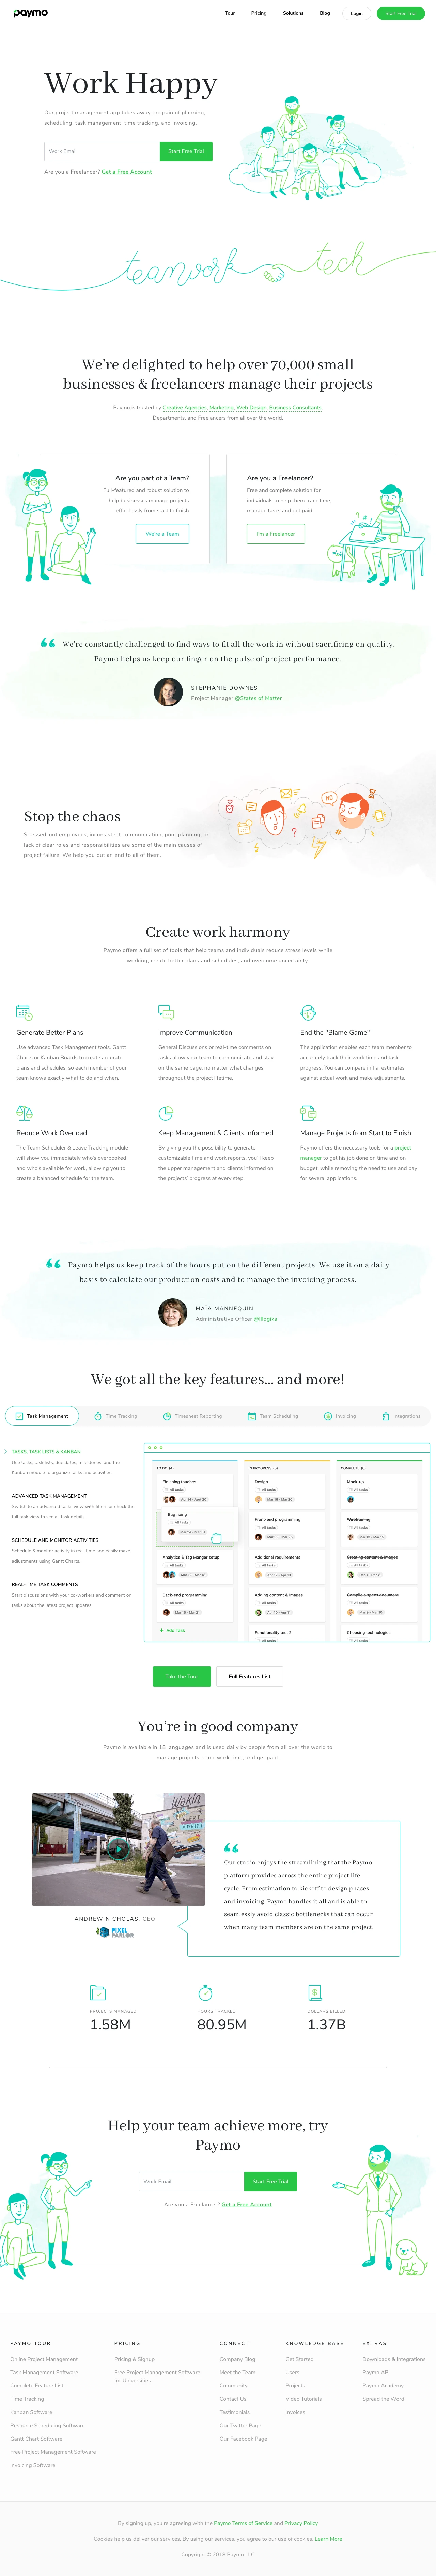 Paymo Landing Page Example: Our project management app takes away the pain of planning, scheduling, task management, time tracking, and invoicing.